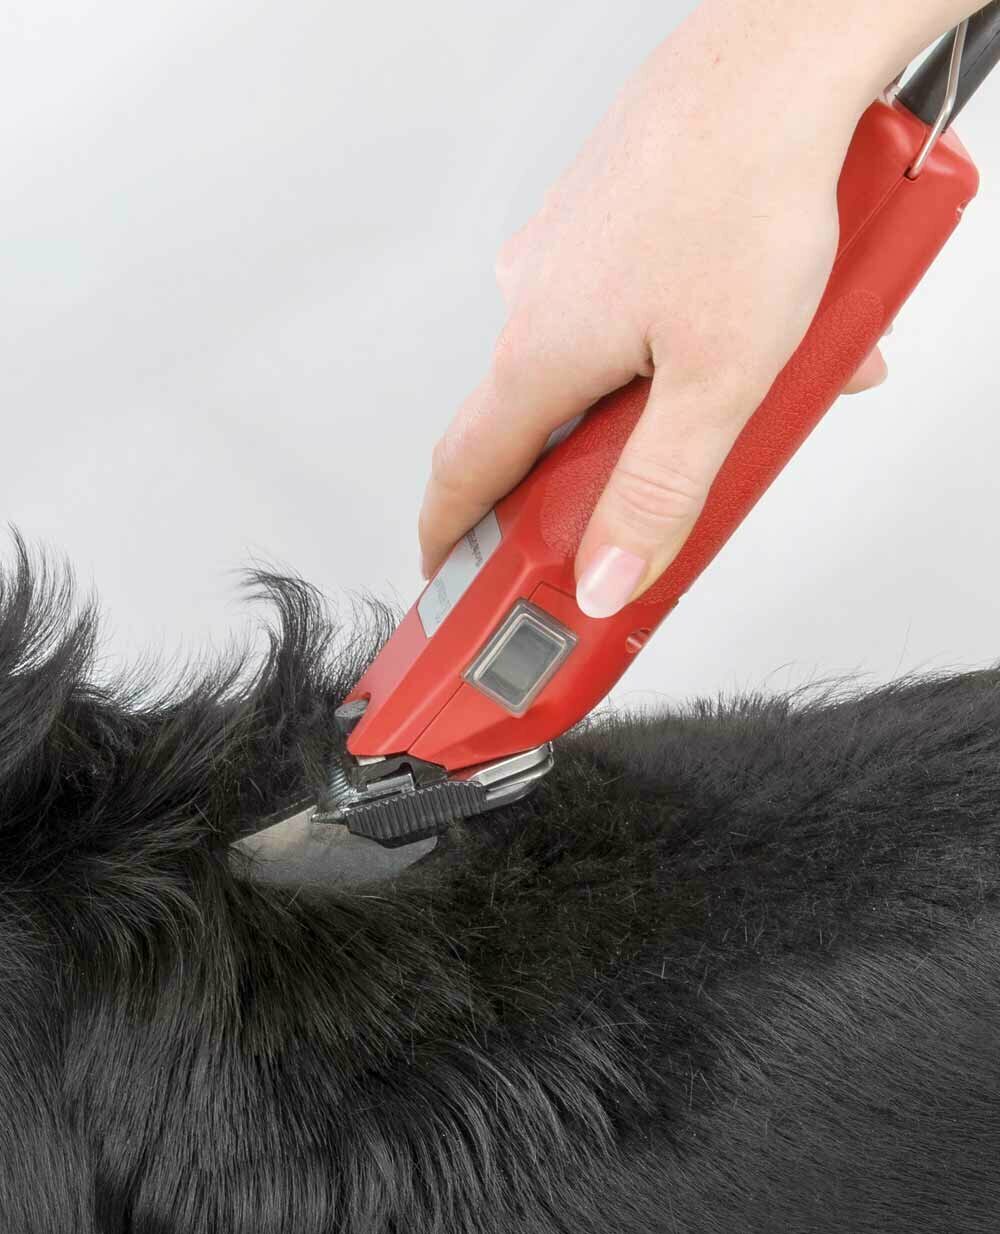 The new powerfull pet clipper fby Aesculap